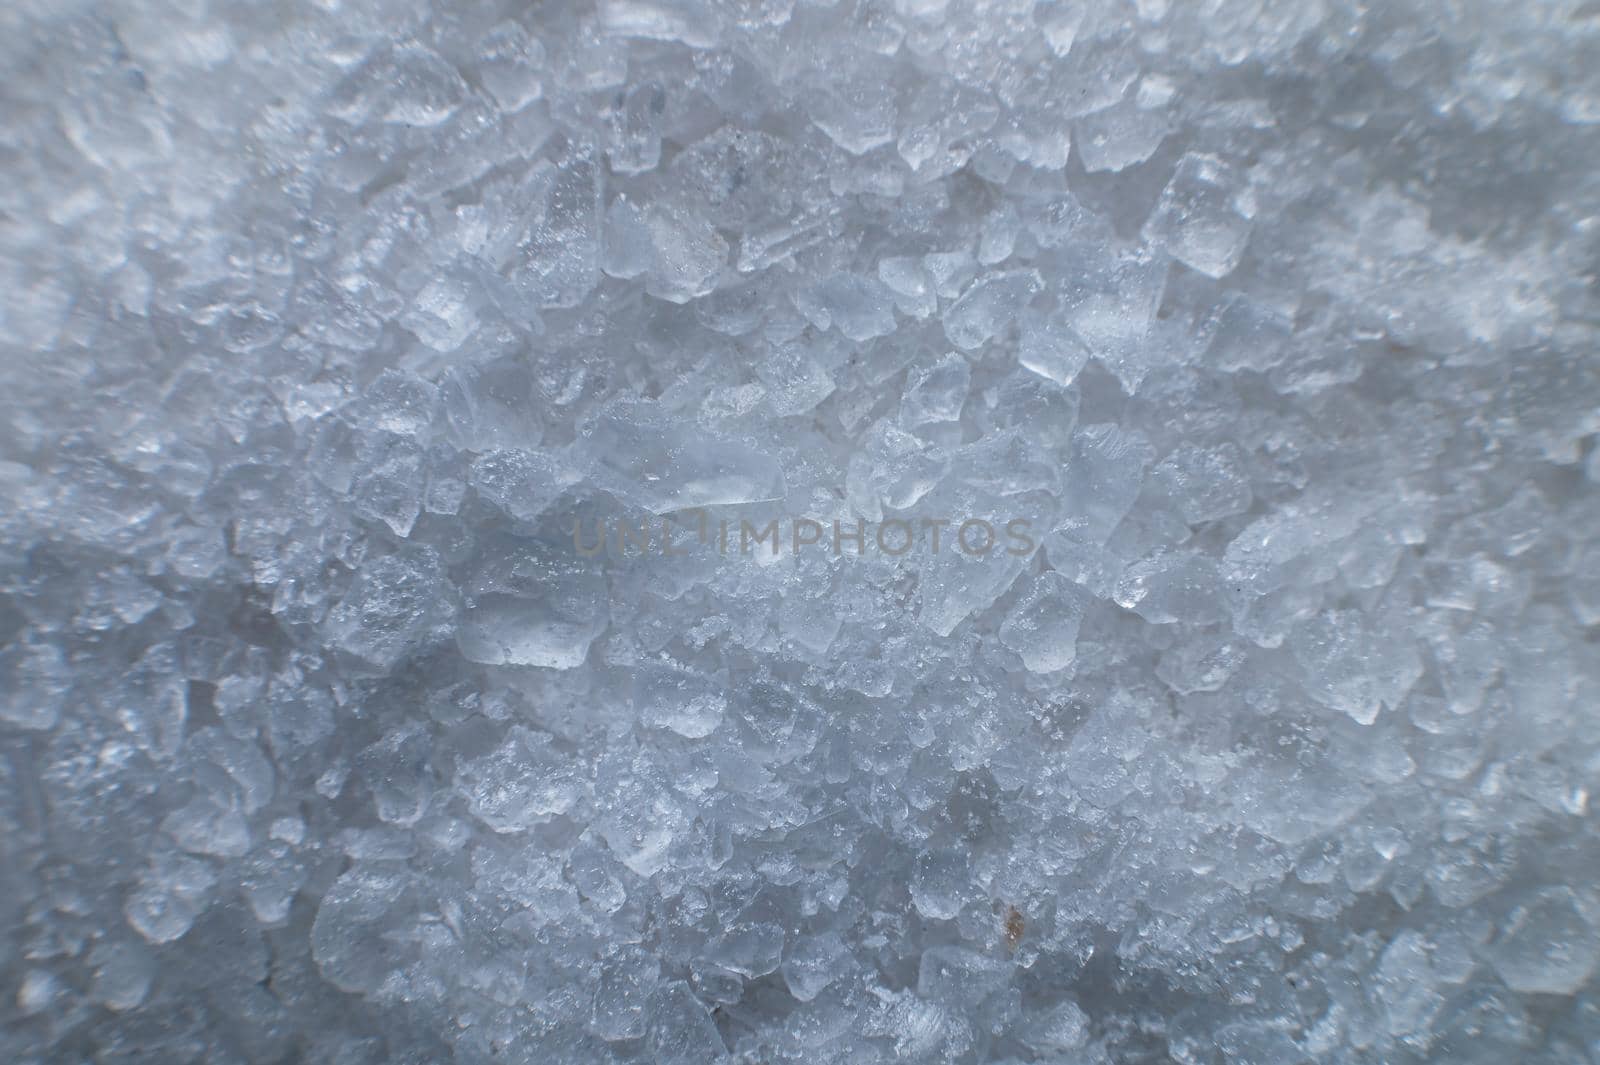 Coarse white iodized salt. Detailed background texture Macro close-up. Salt crystals of different sizes.